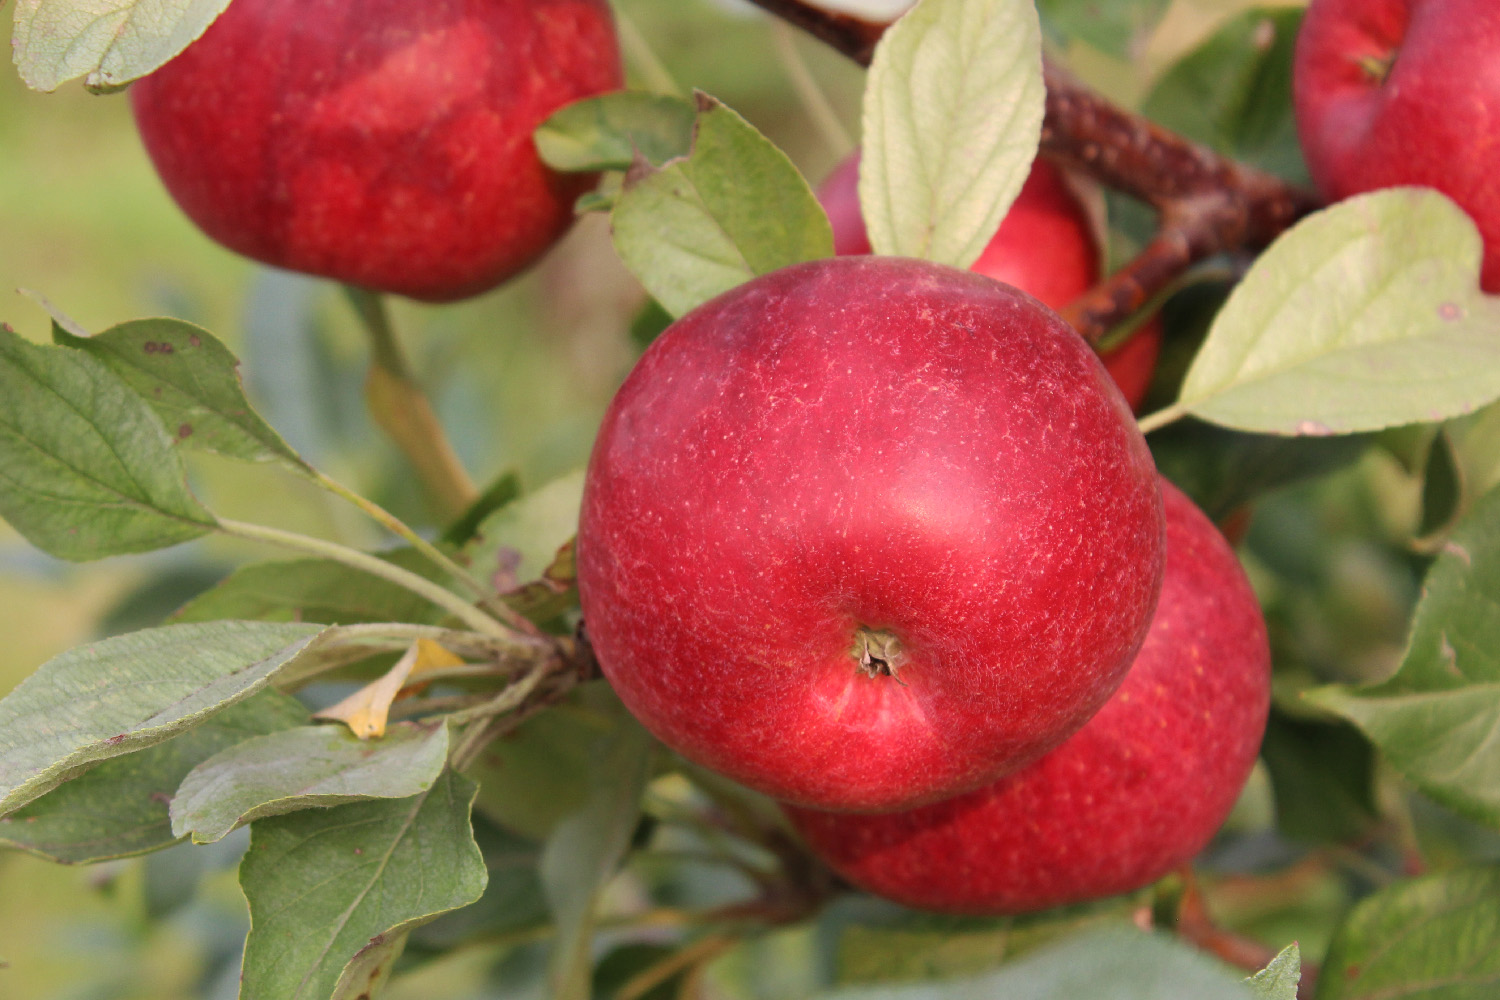 A close-up of ripe red apples on a branch.